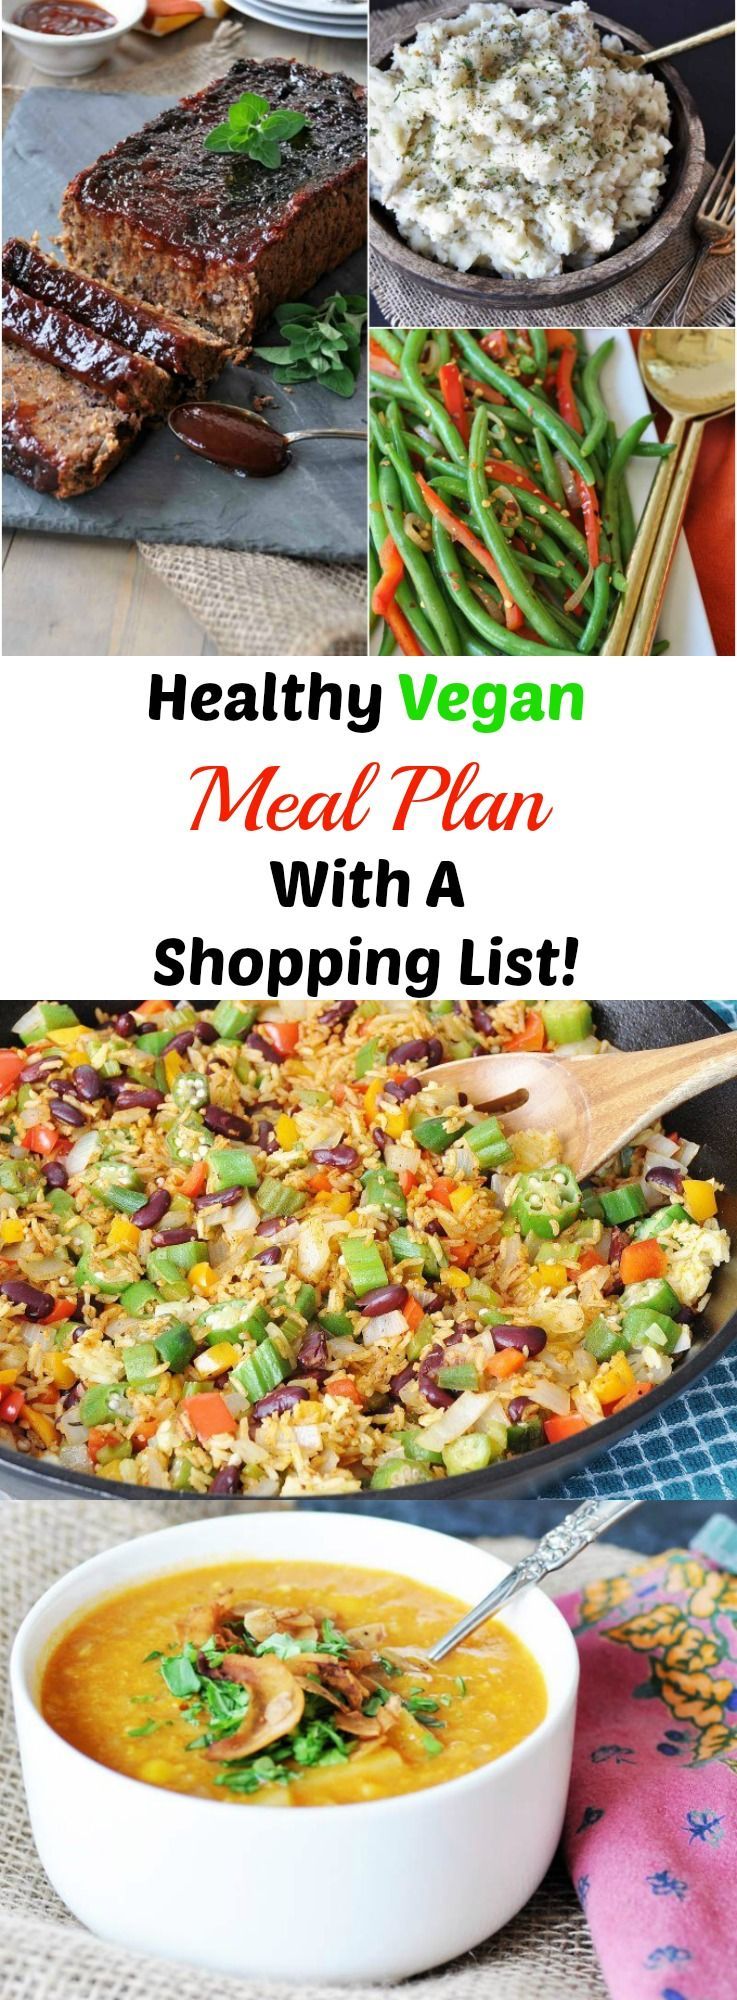 A healthy vegan weekly meal plan with a shopping list! This will help you eat healthier and smarter, while making your life